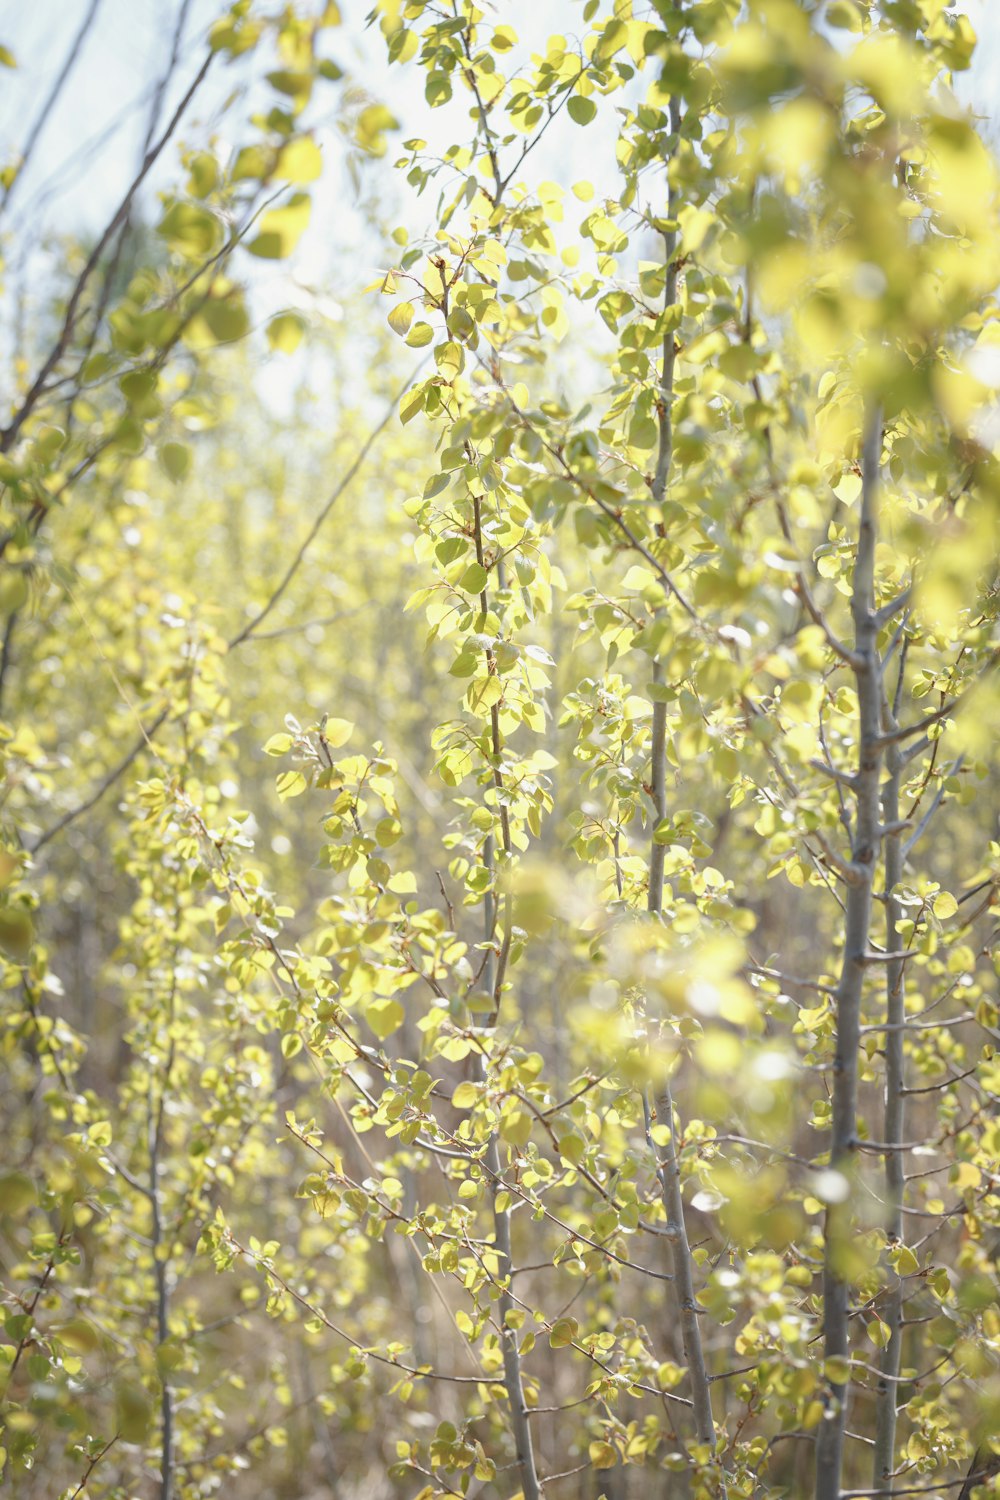 yellow flowers on tree branch during daytime